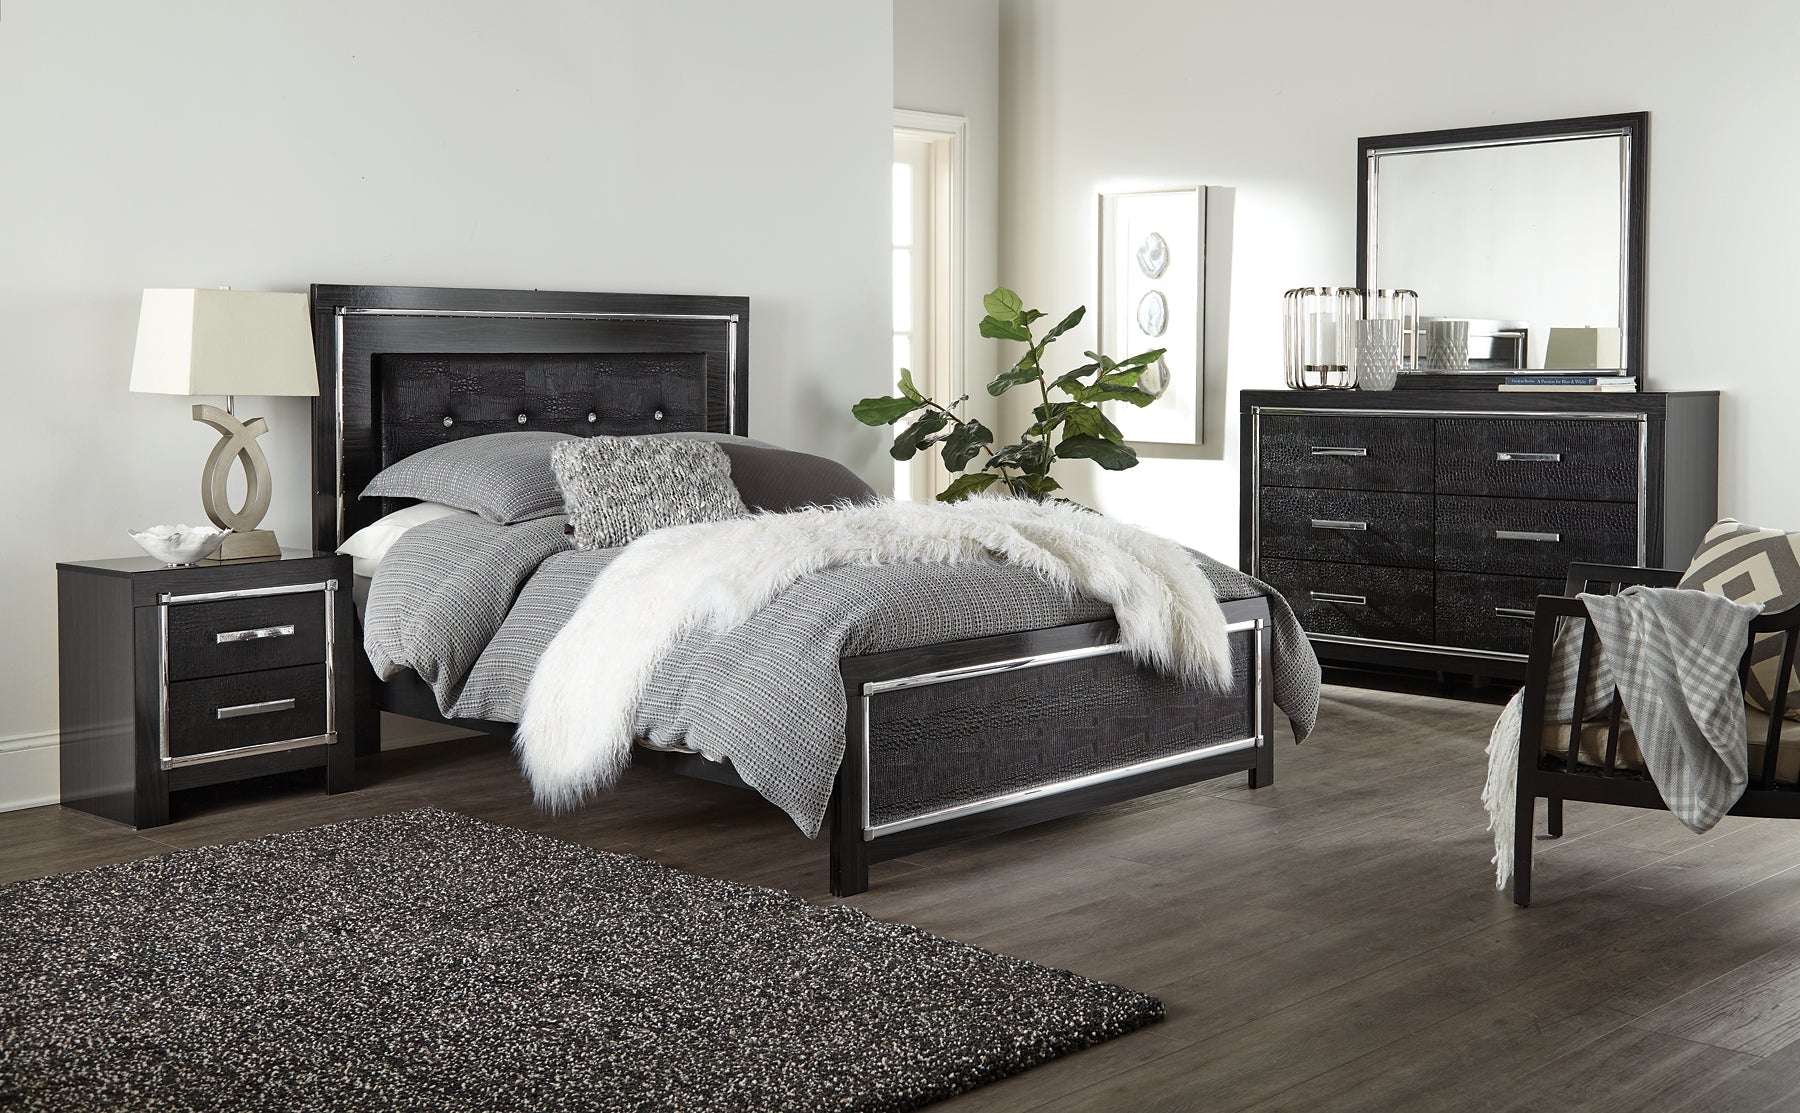 Kaydell Dresser and Mirror at Cloud 9 Mattress & Furniture furniture, home furnishing, home decor